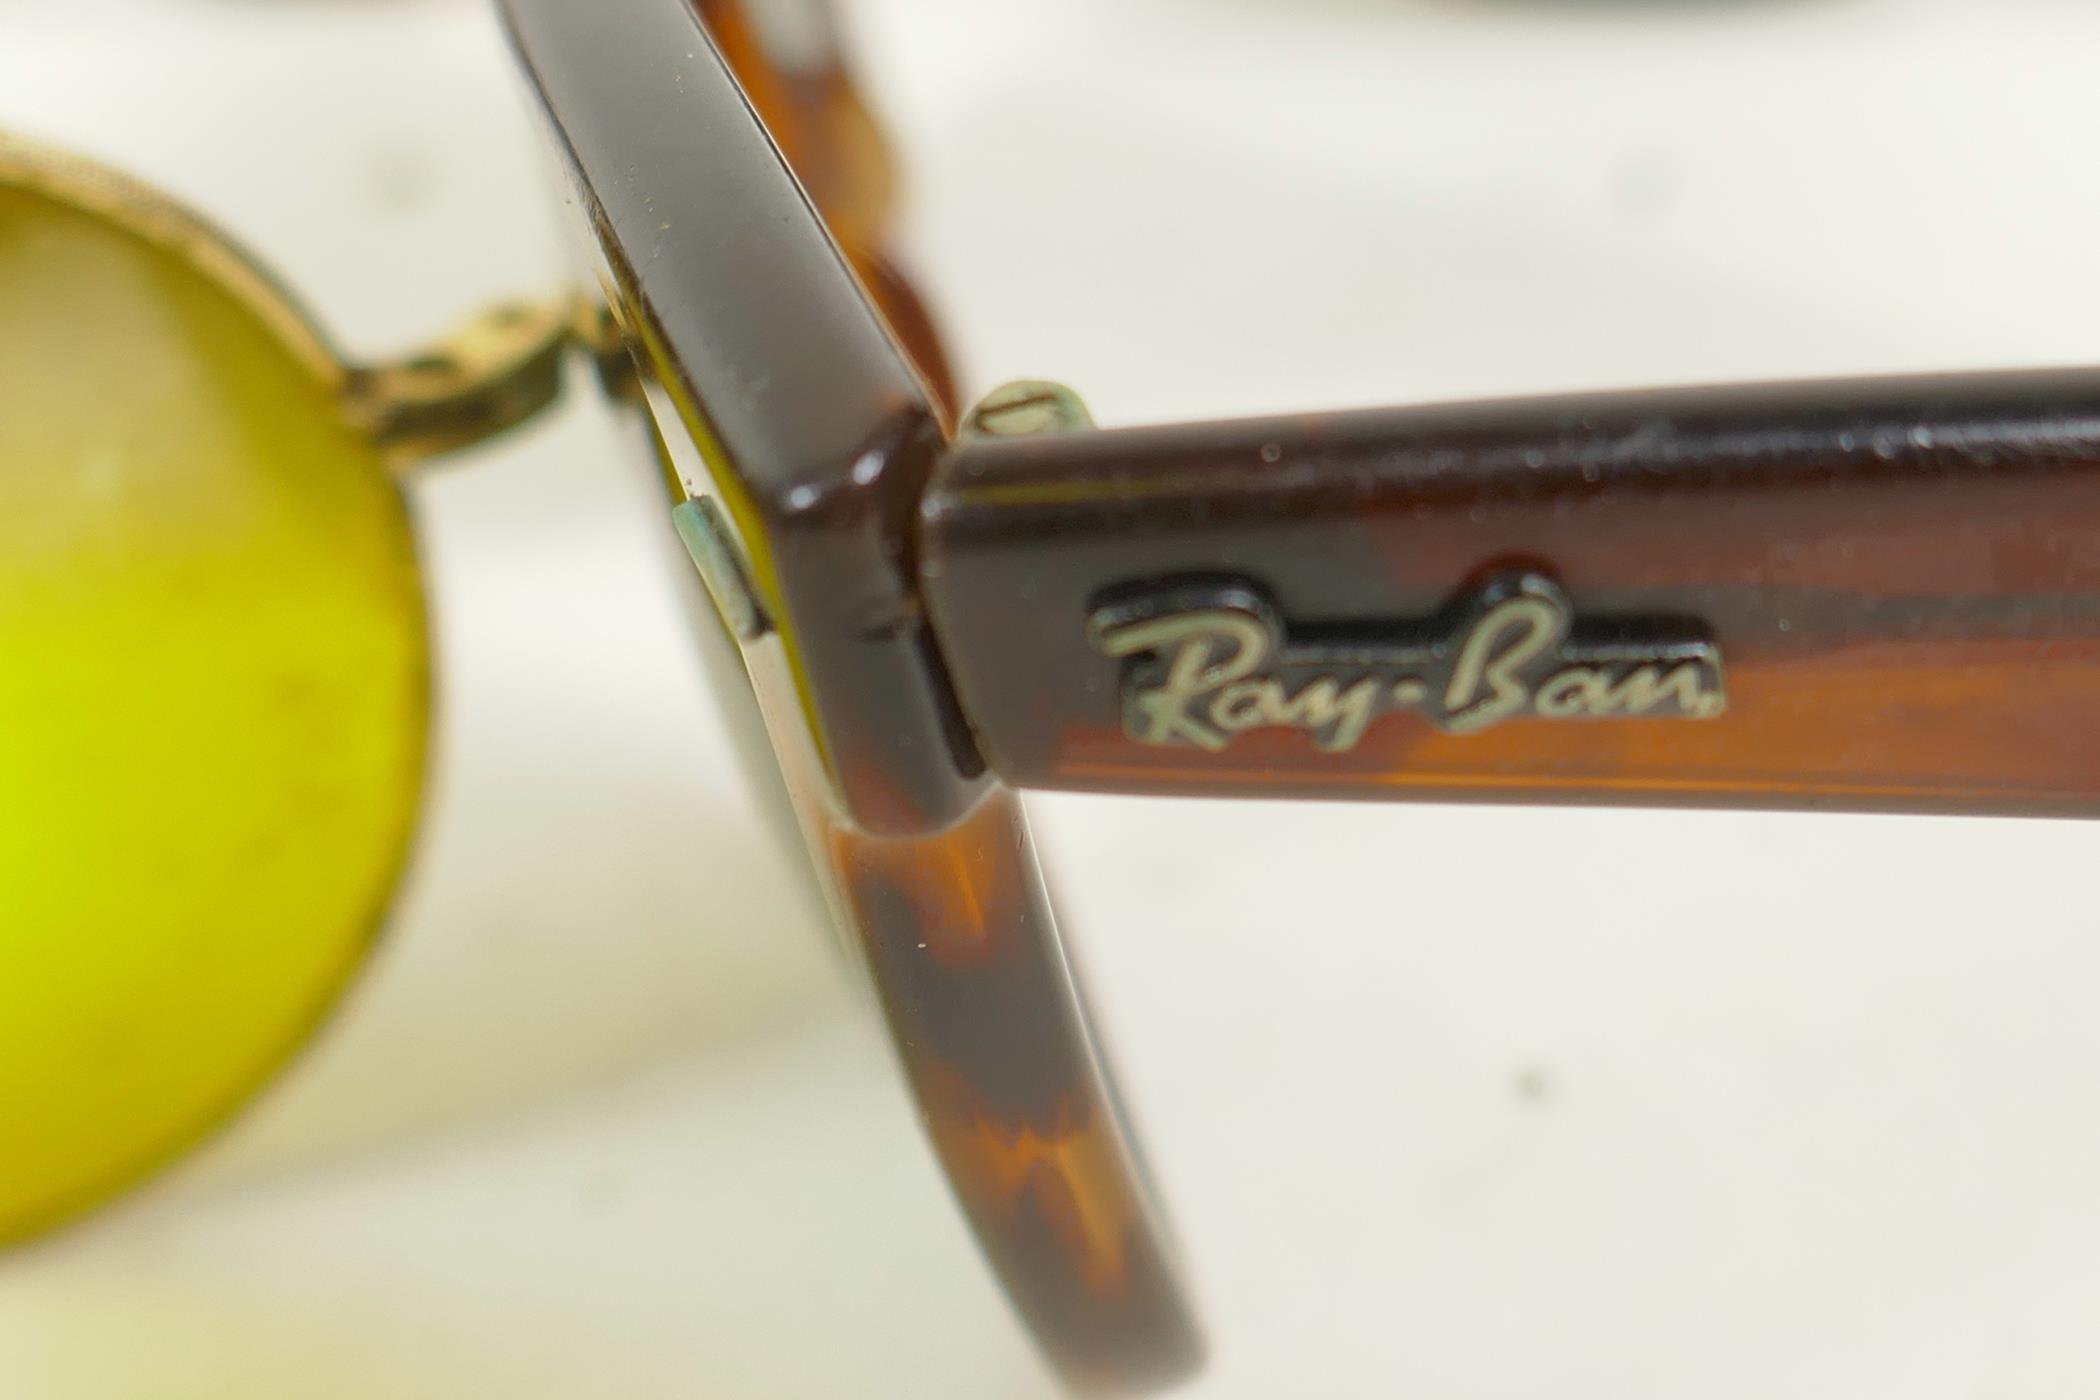 A collection of vintage sunglasses including Ray Bans - Image 6 of 8